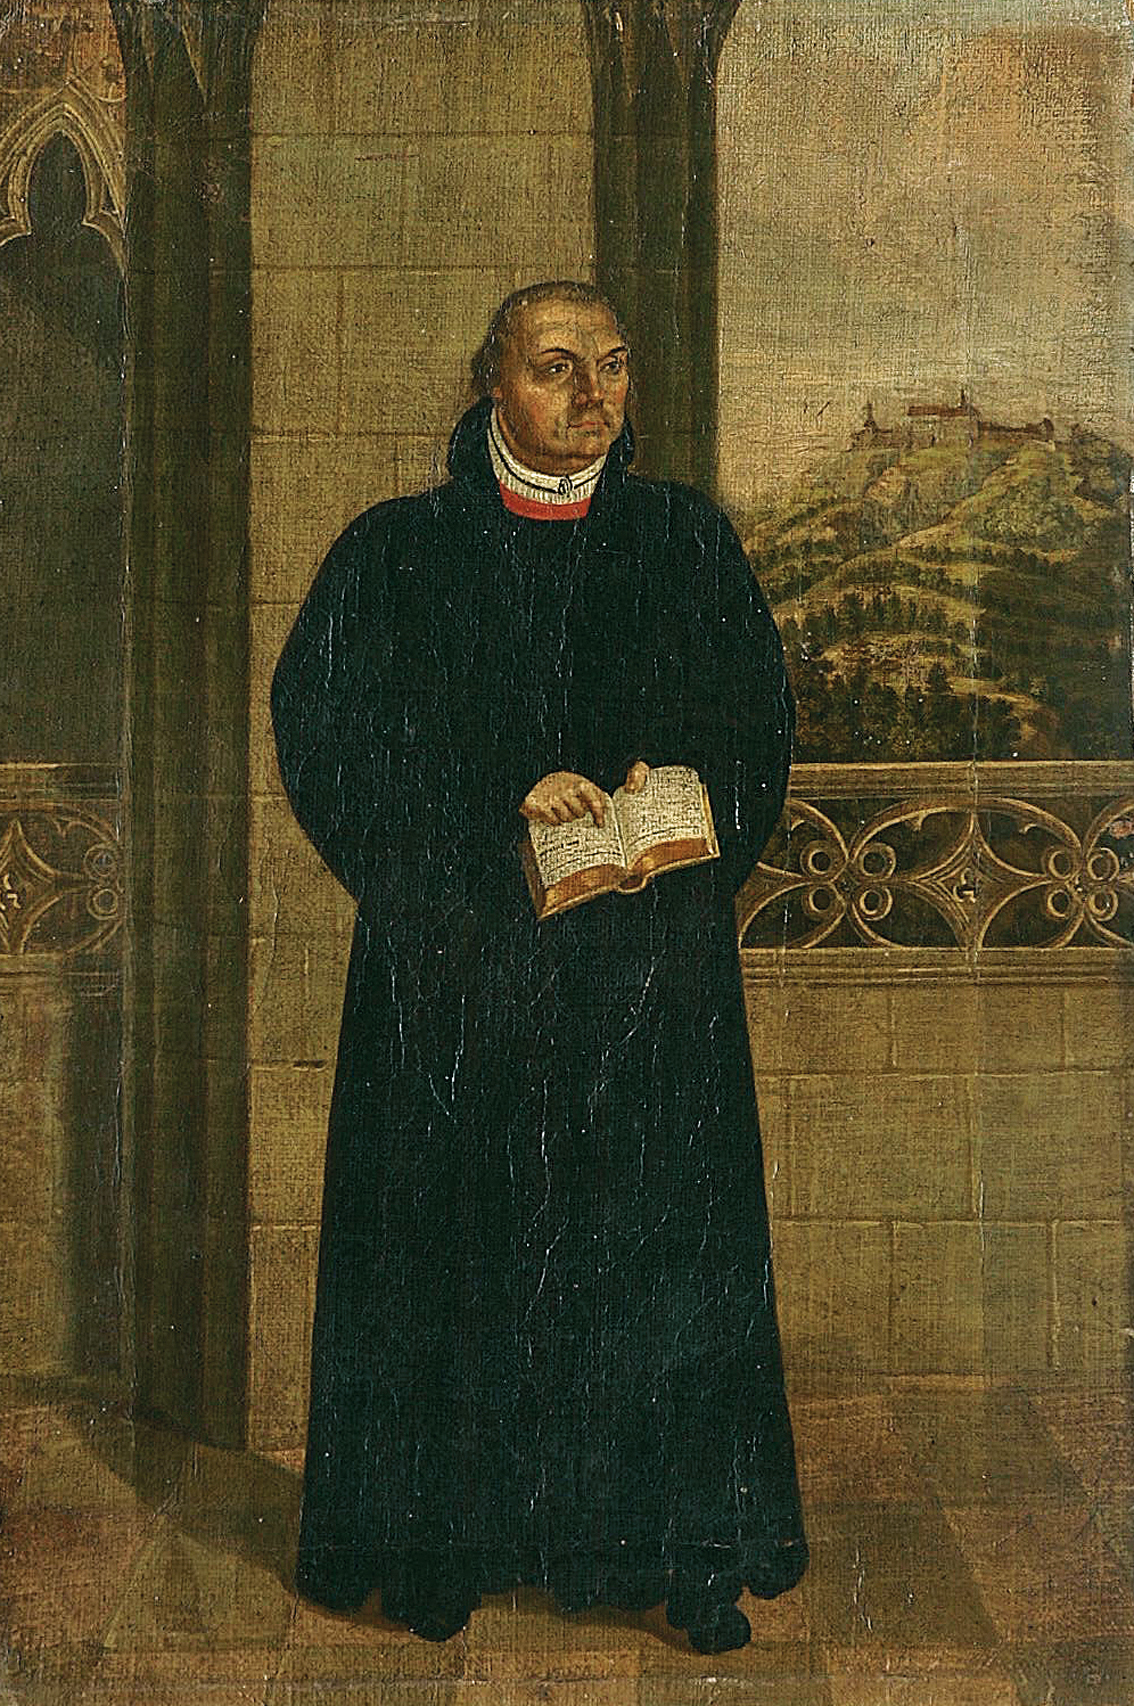 "Martin Luther"